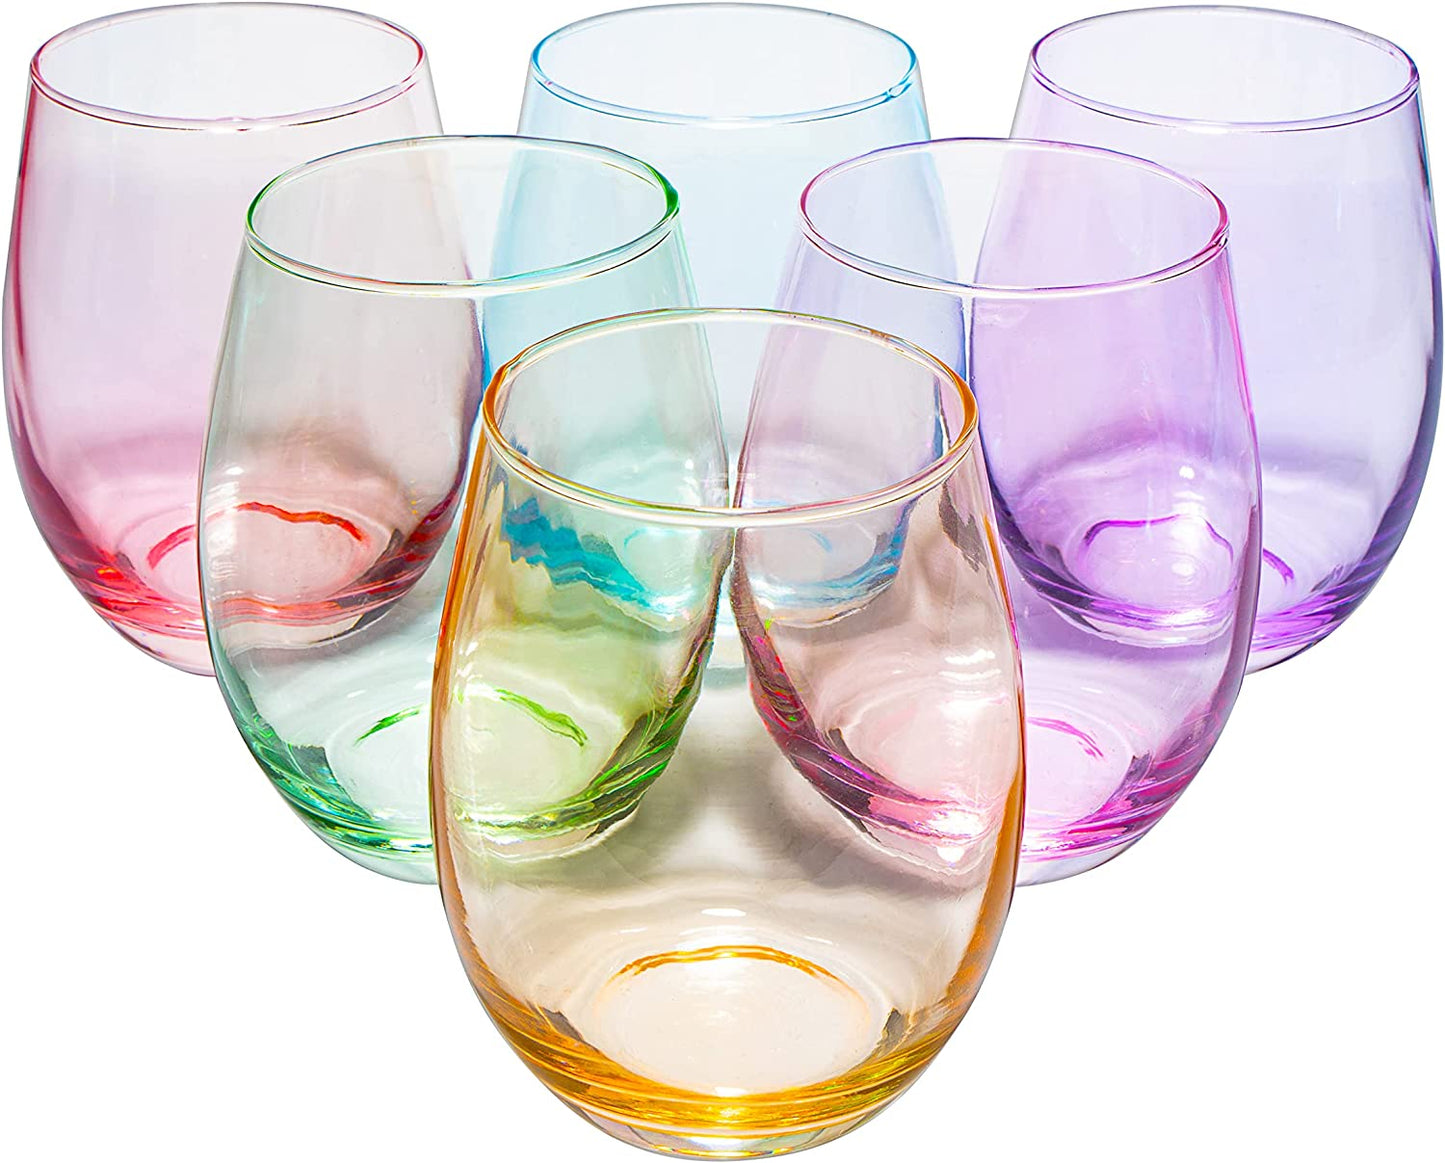 Colored Stemless Wine Glasses 12 oz (Set of 6) - by The Wine Savant